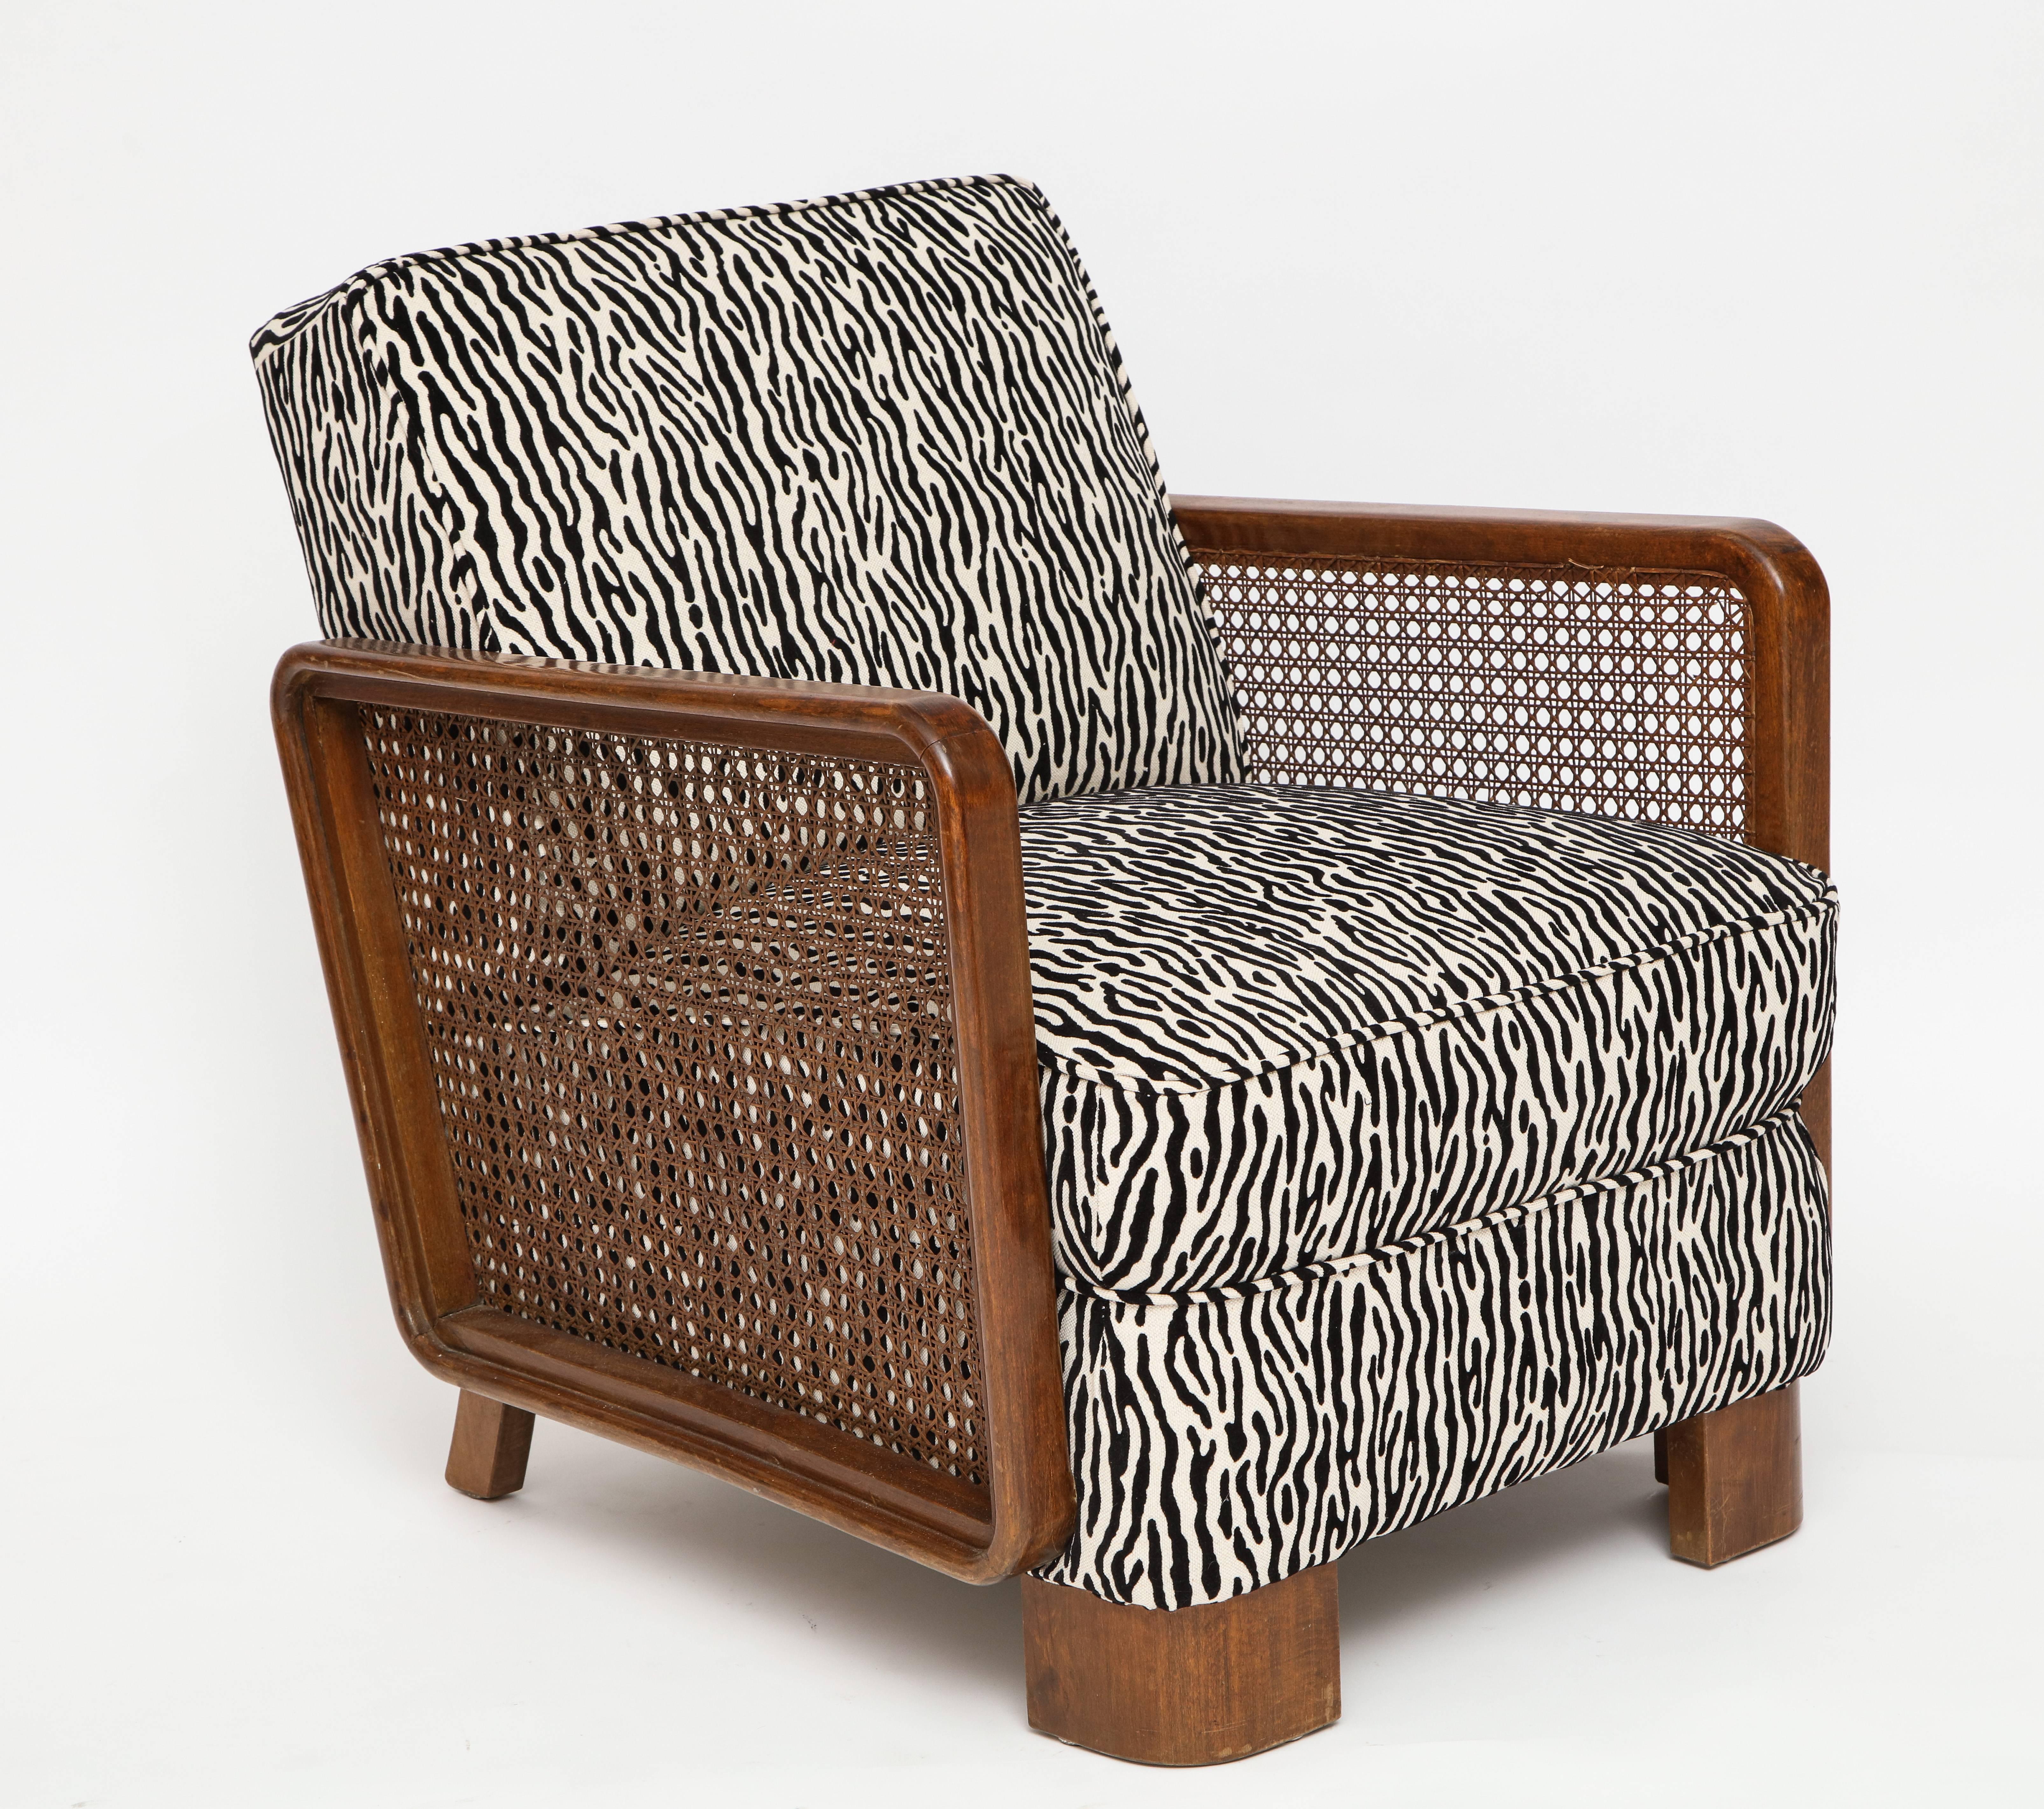 French Pair of Deco Cane Lounge Chairs Black and White Animal Print, France, 1940s